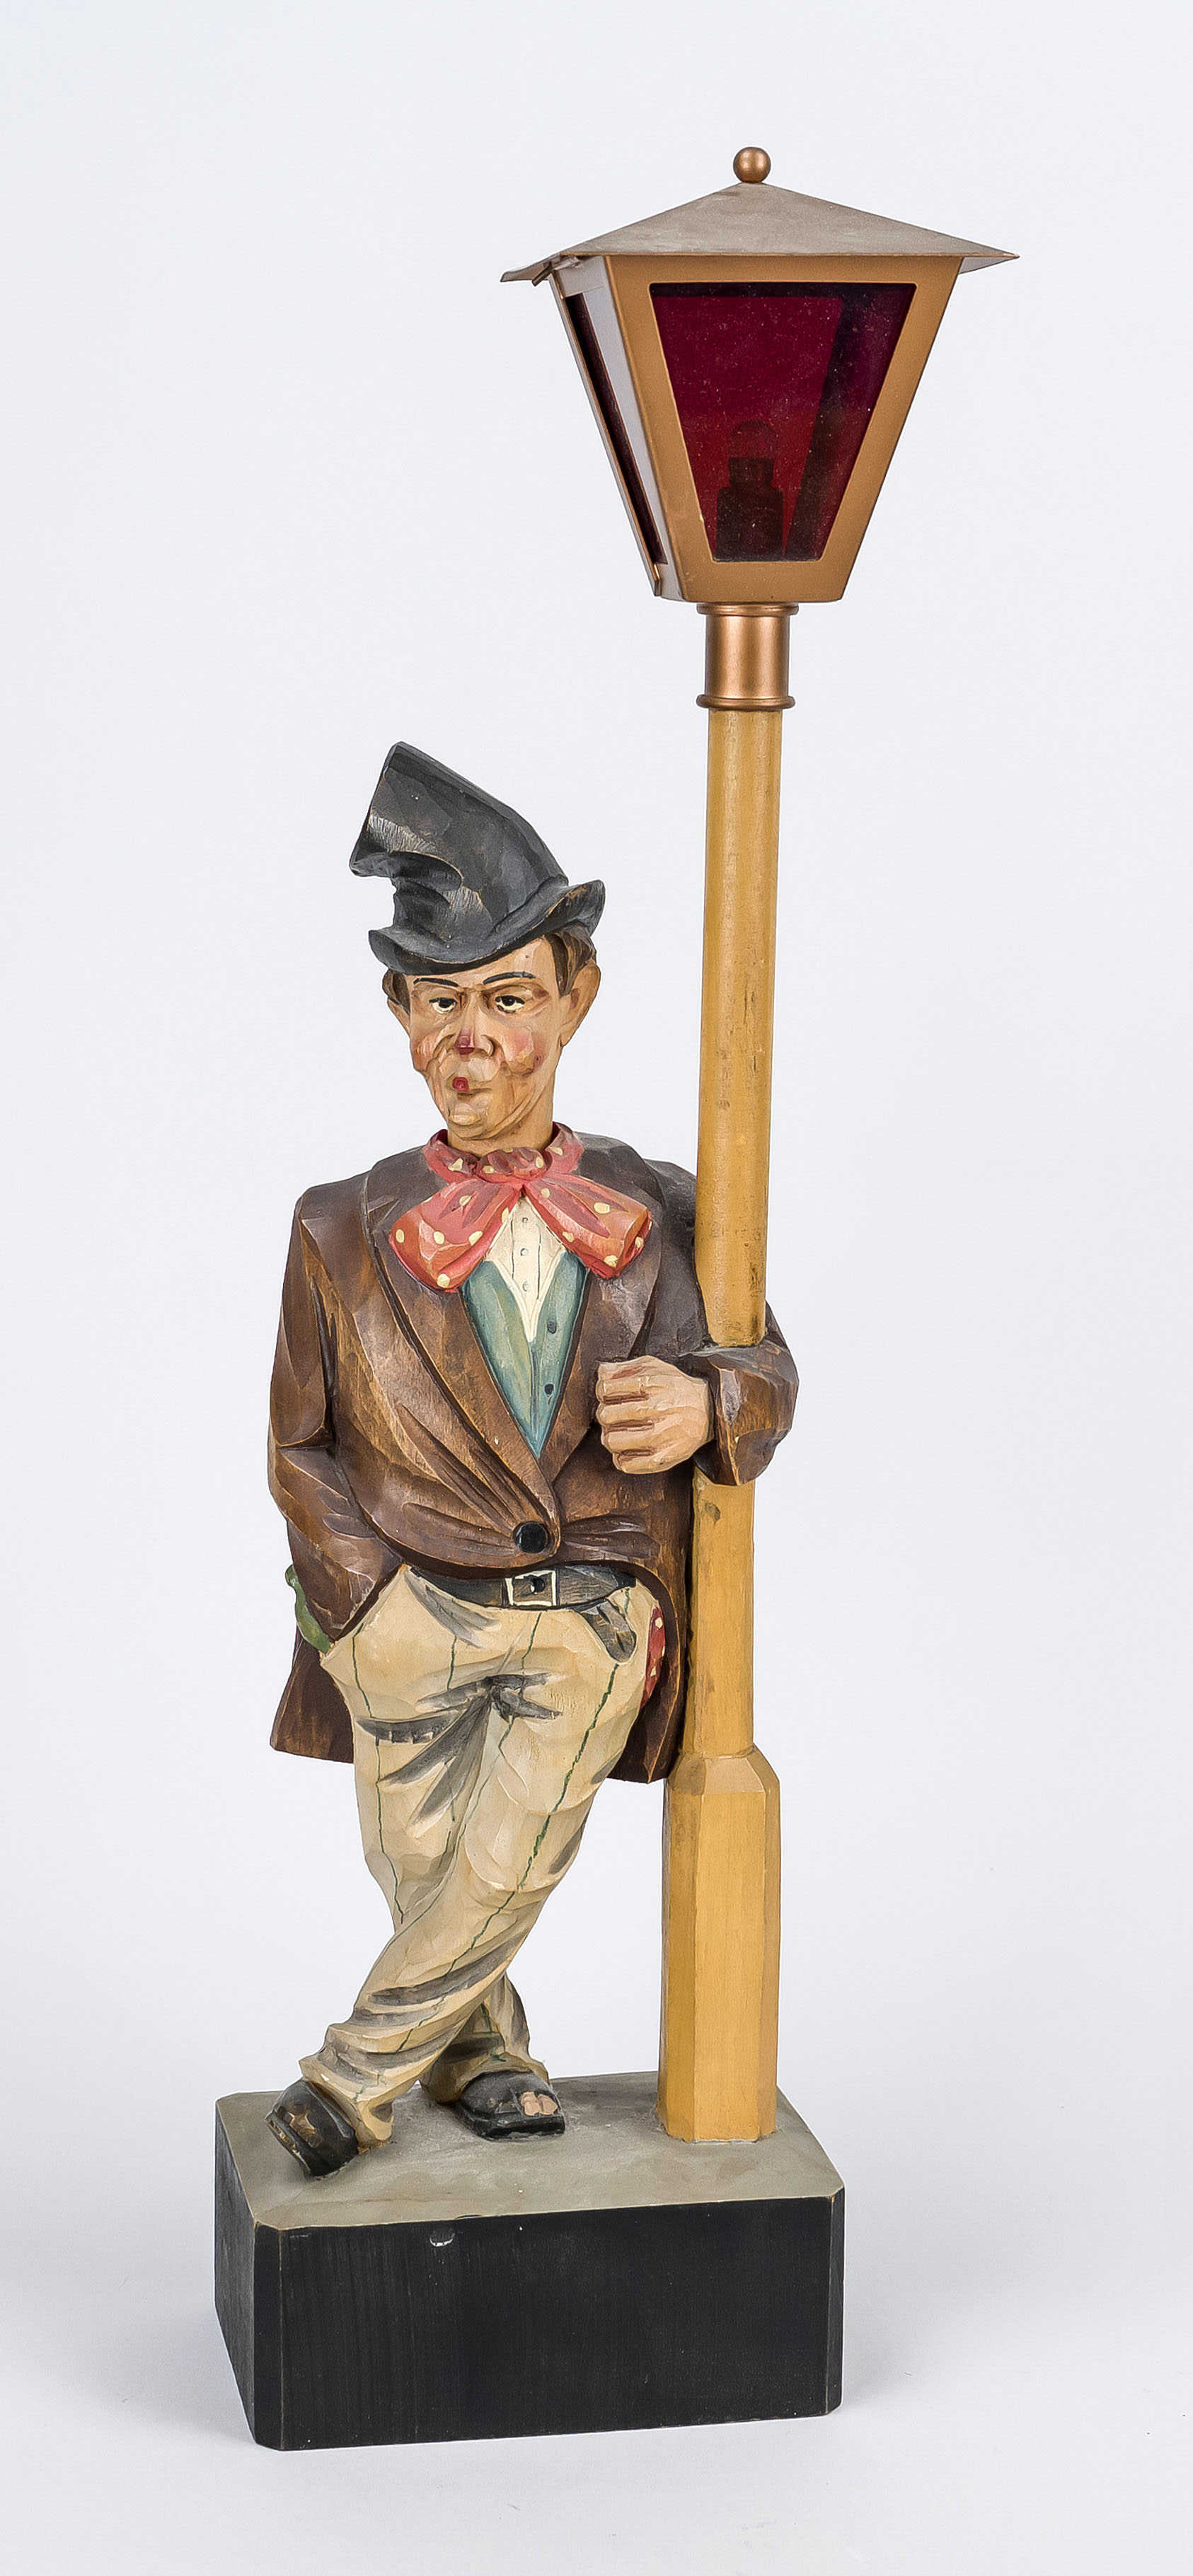 Tramp leaning against a lantern, 20th century, carved and painted wooden figure, mechanism with